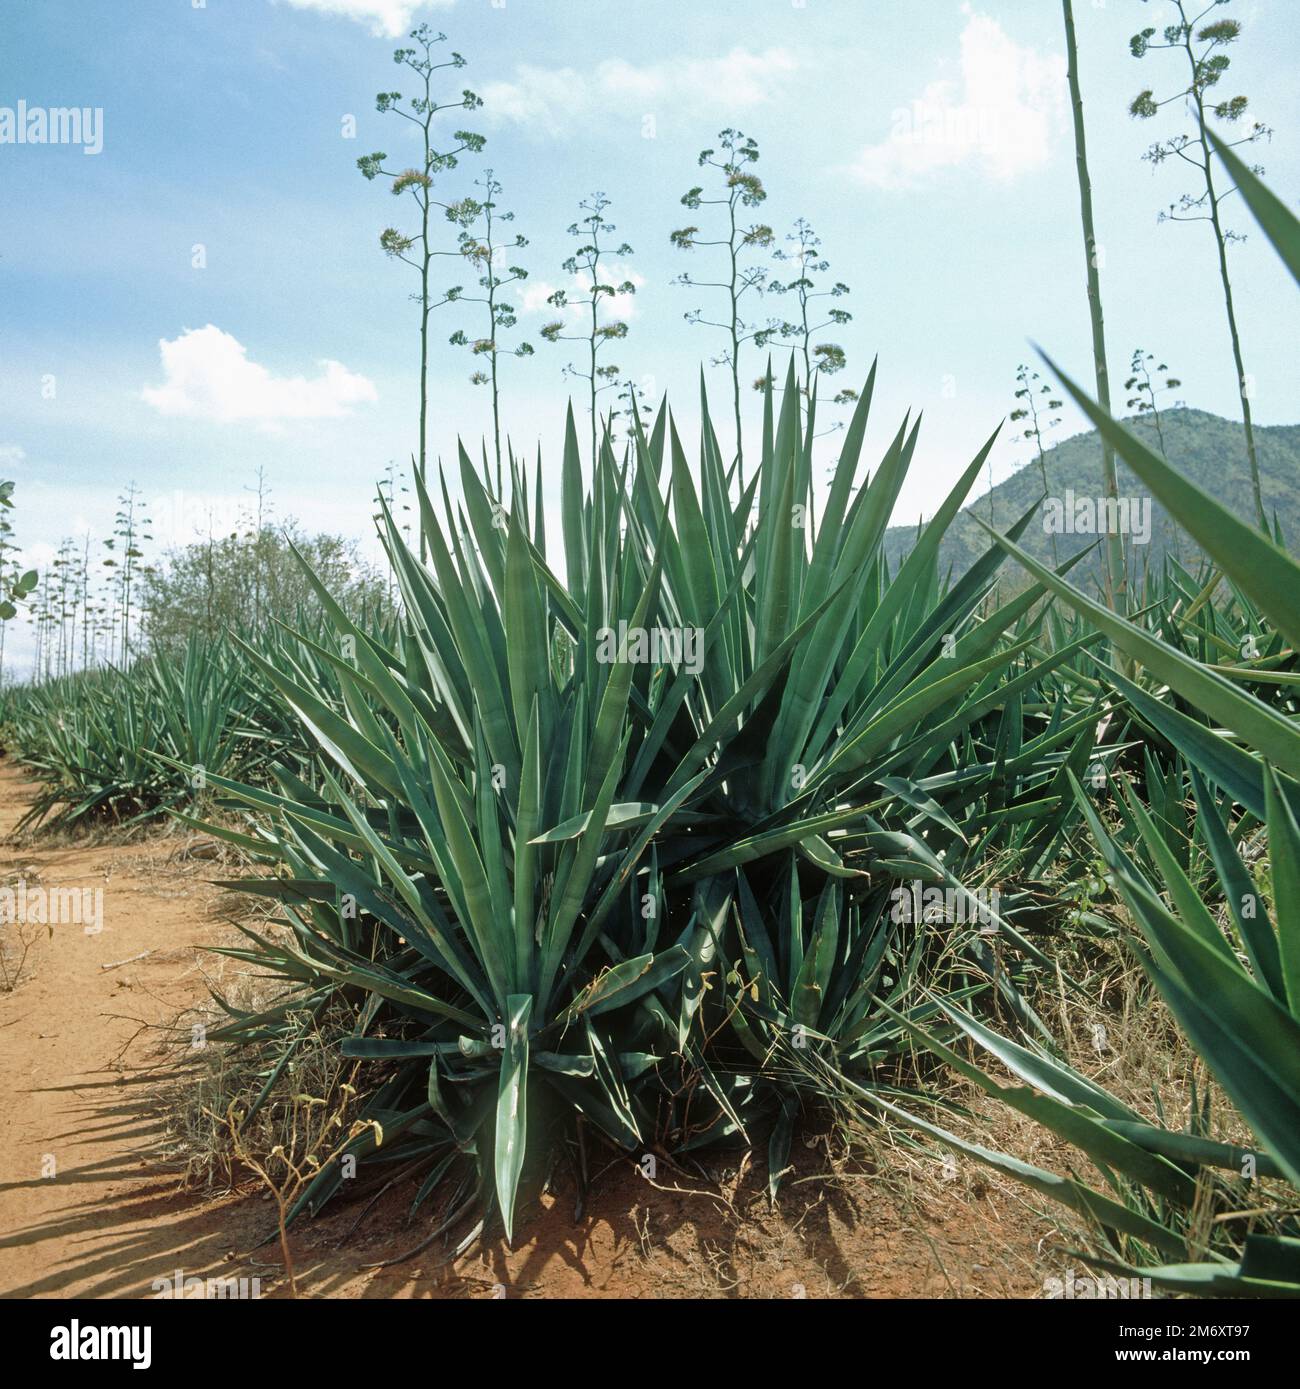 Mature sisal (Agave sisalana) large succulent fibre crop plants flowering in a plantation, Tanzania, East Africa, July Stock Photo